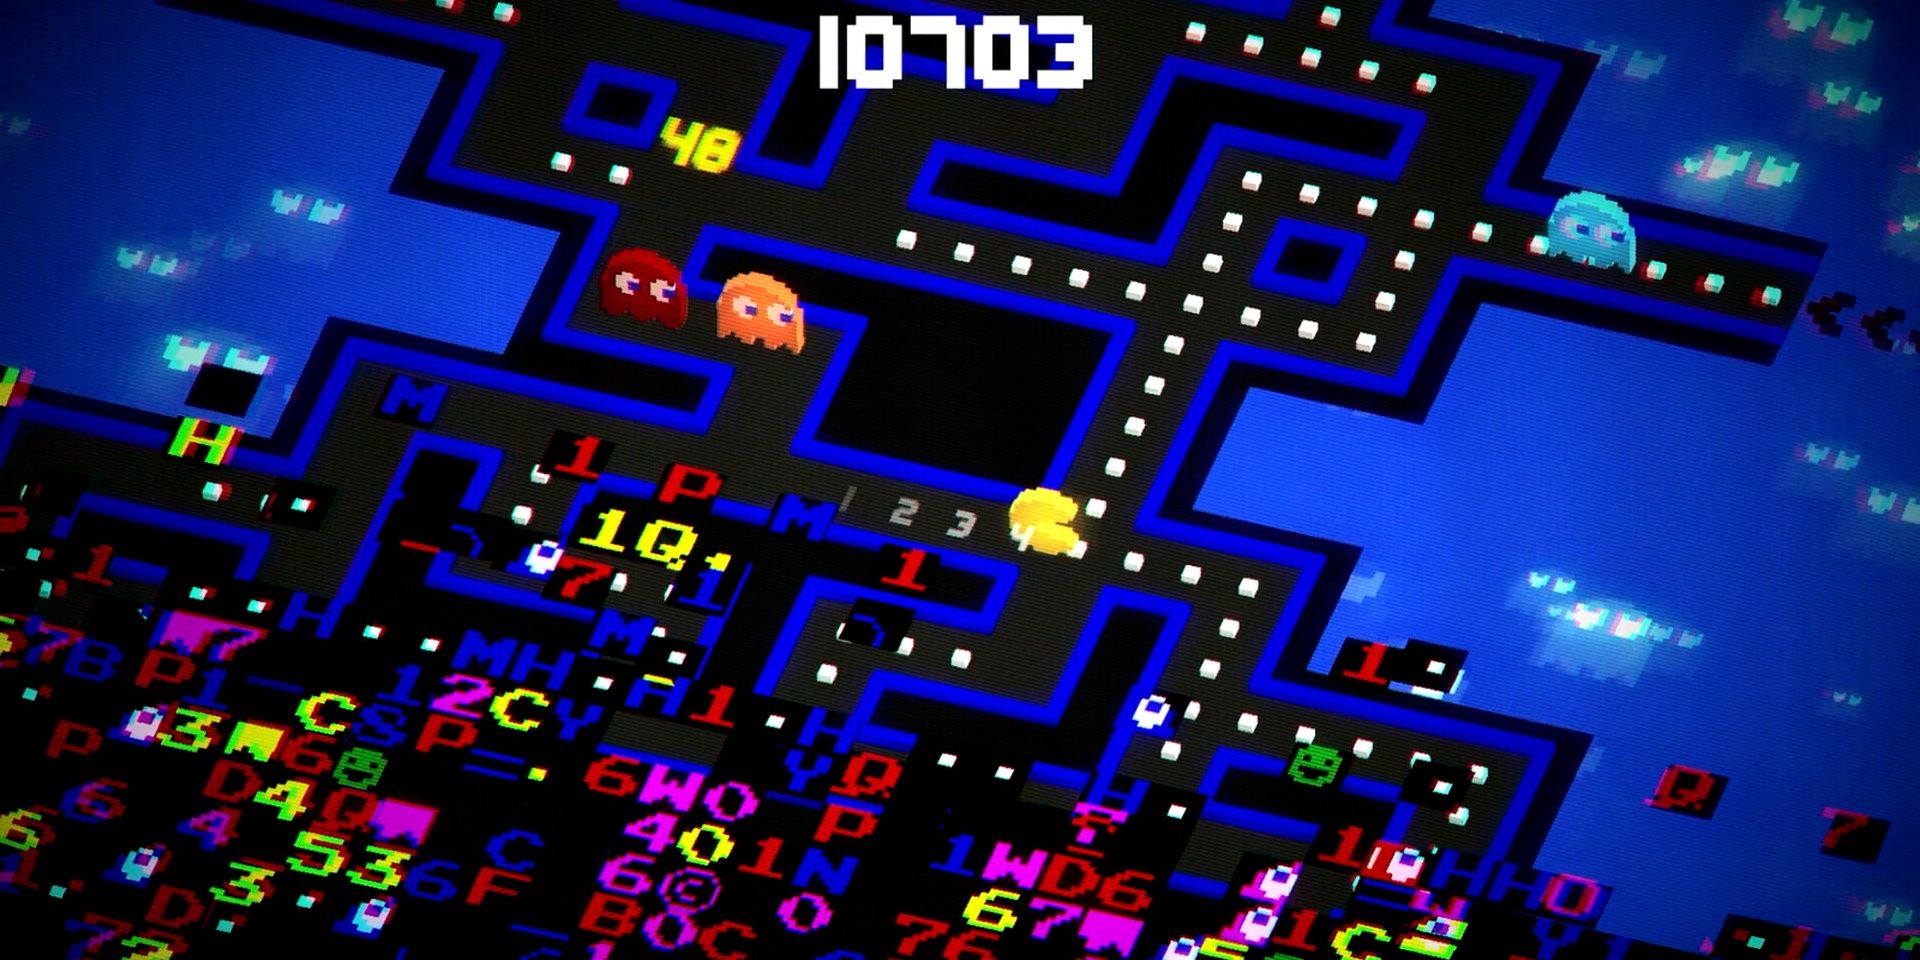 The glitch chasing the player in PAC-MAN 256